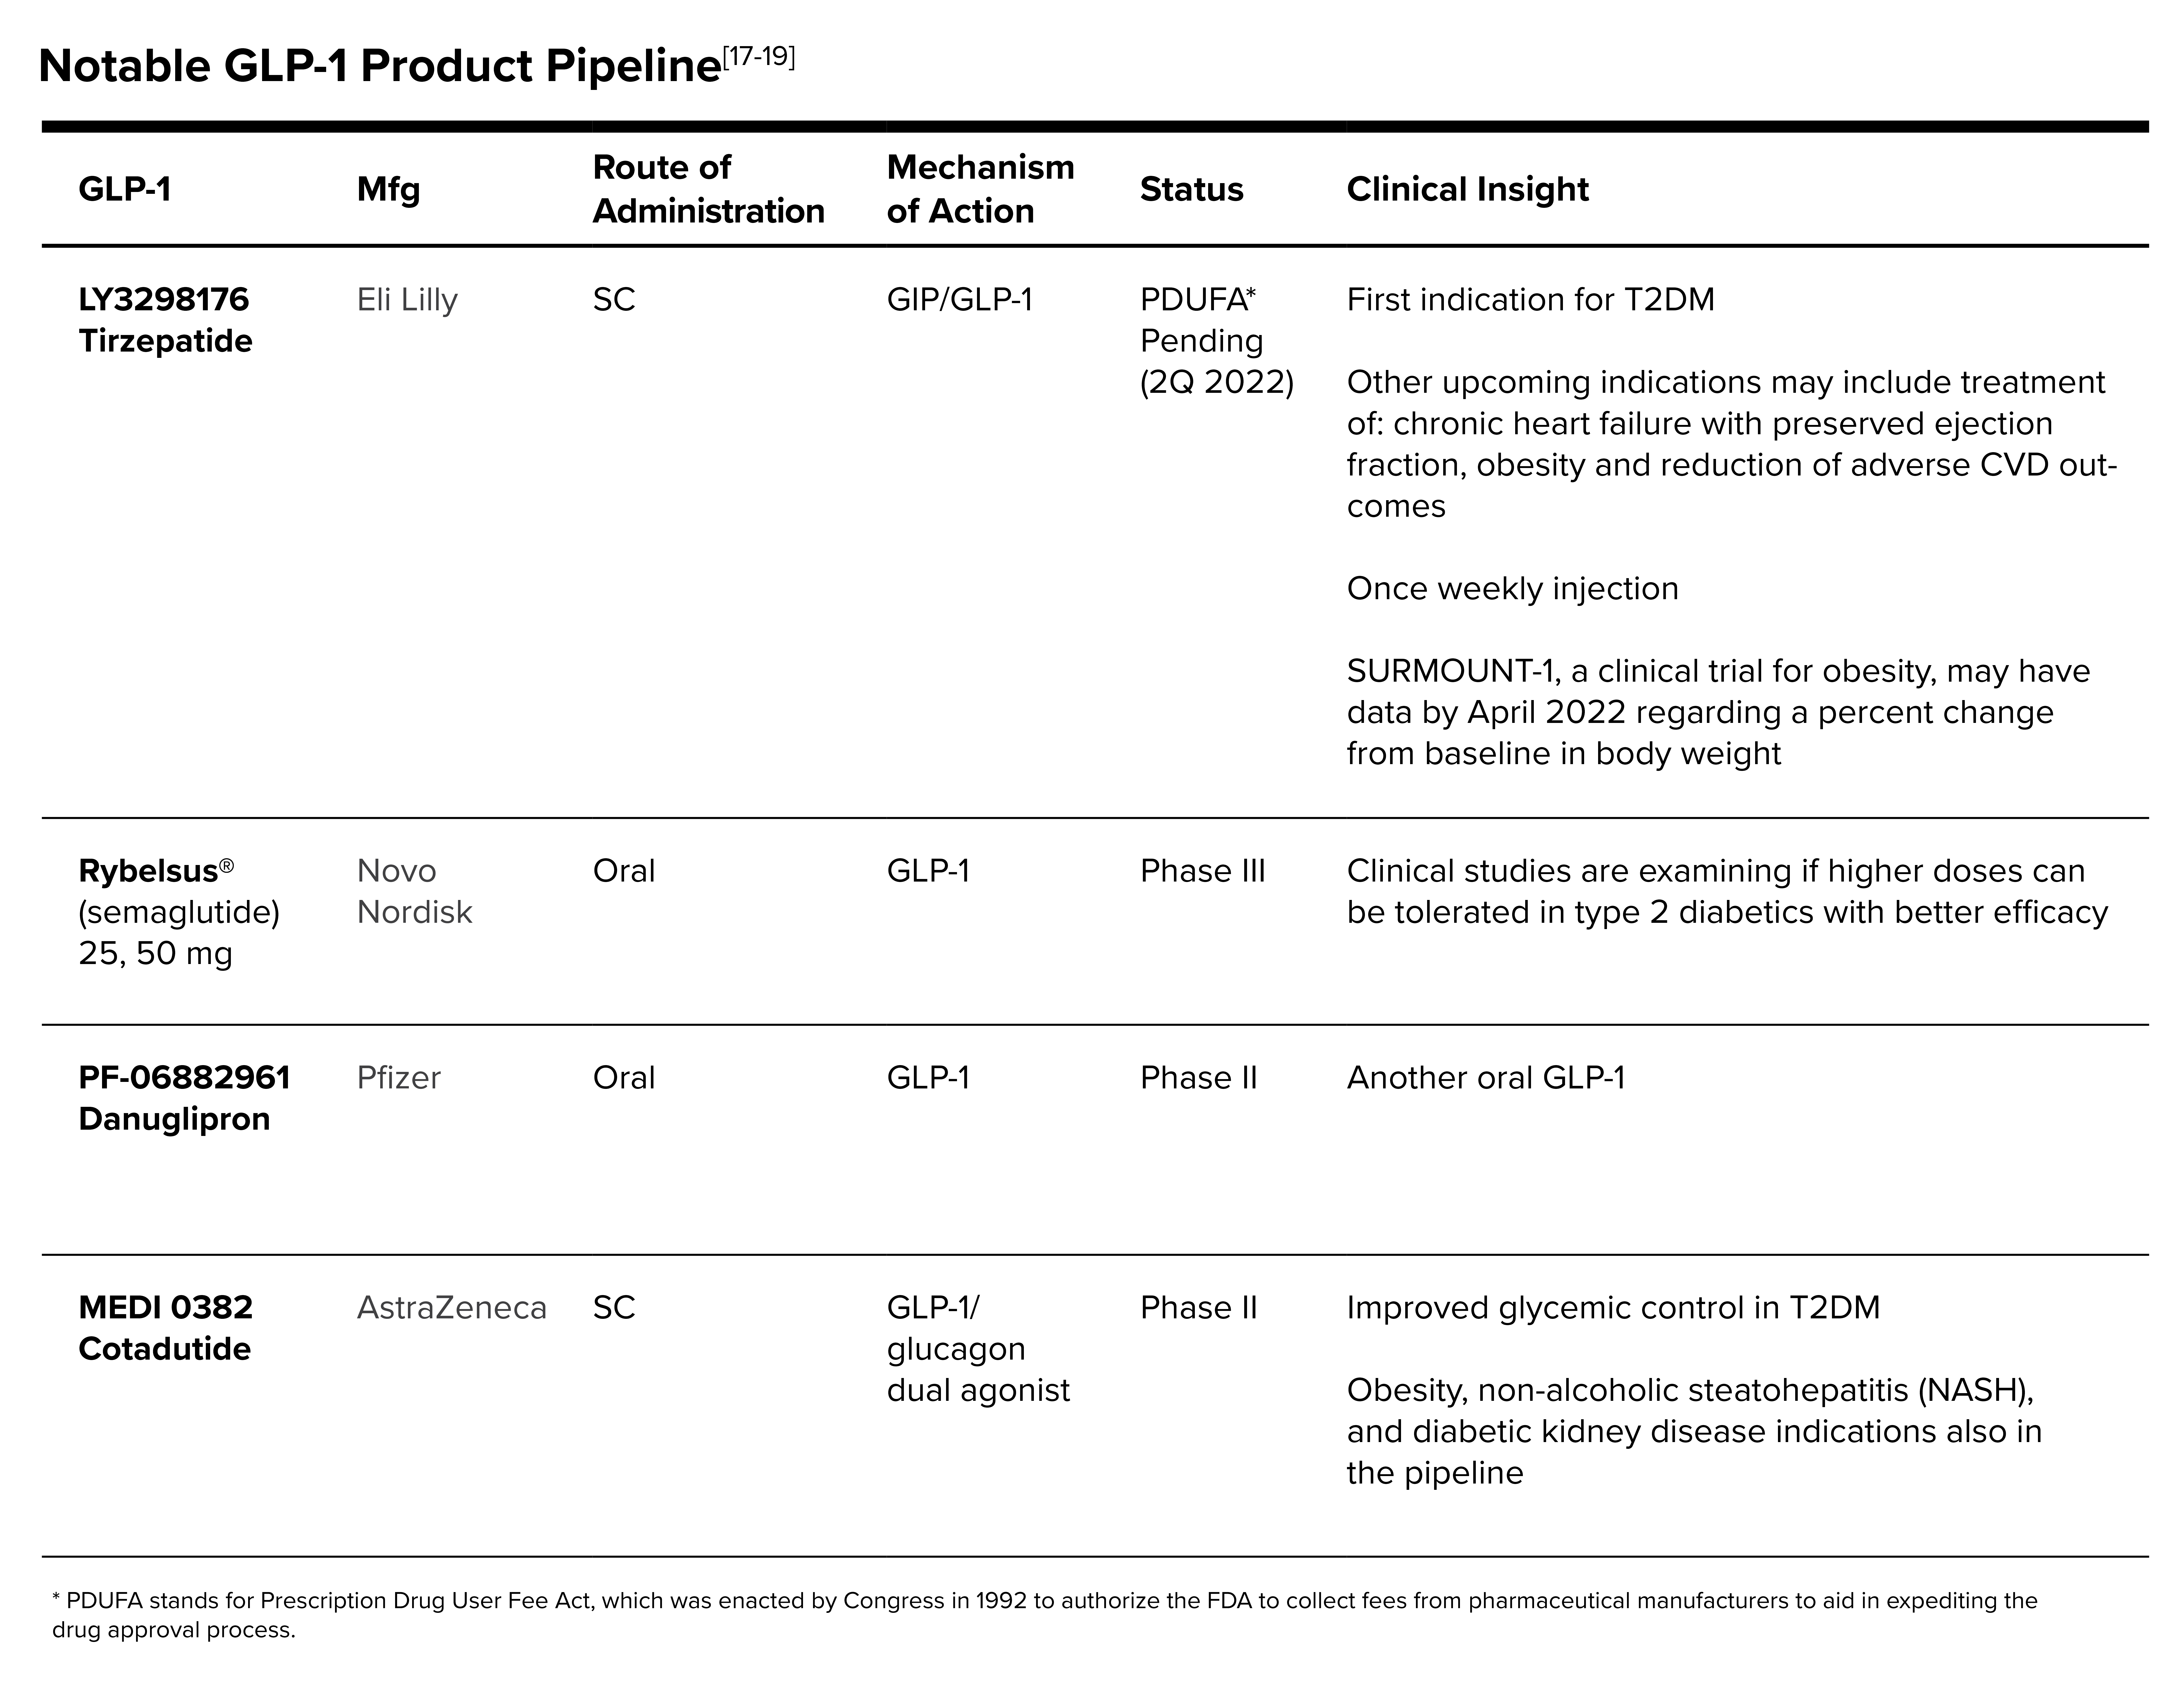 Notable GLP-1 Product Pipeline_table